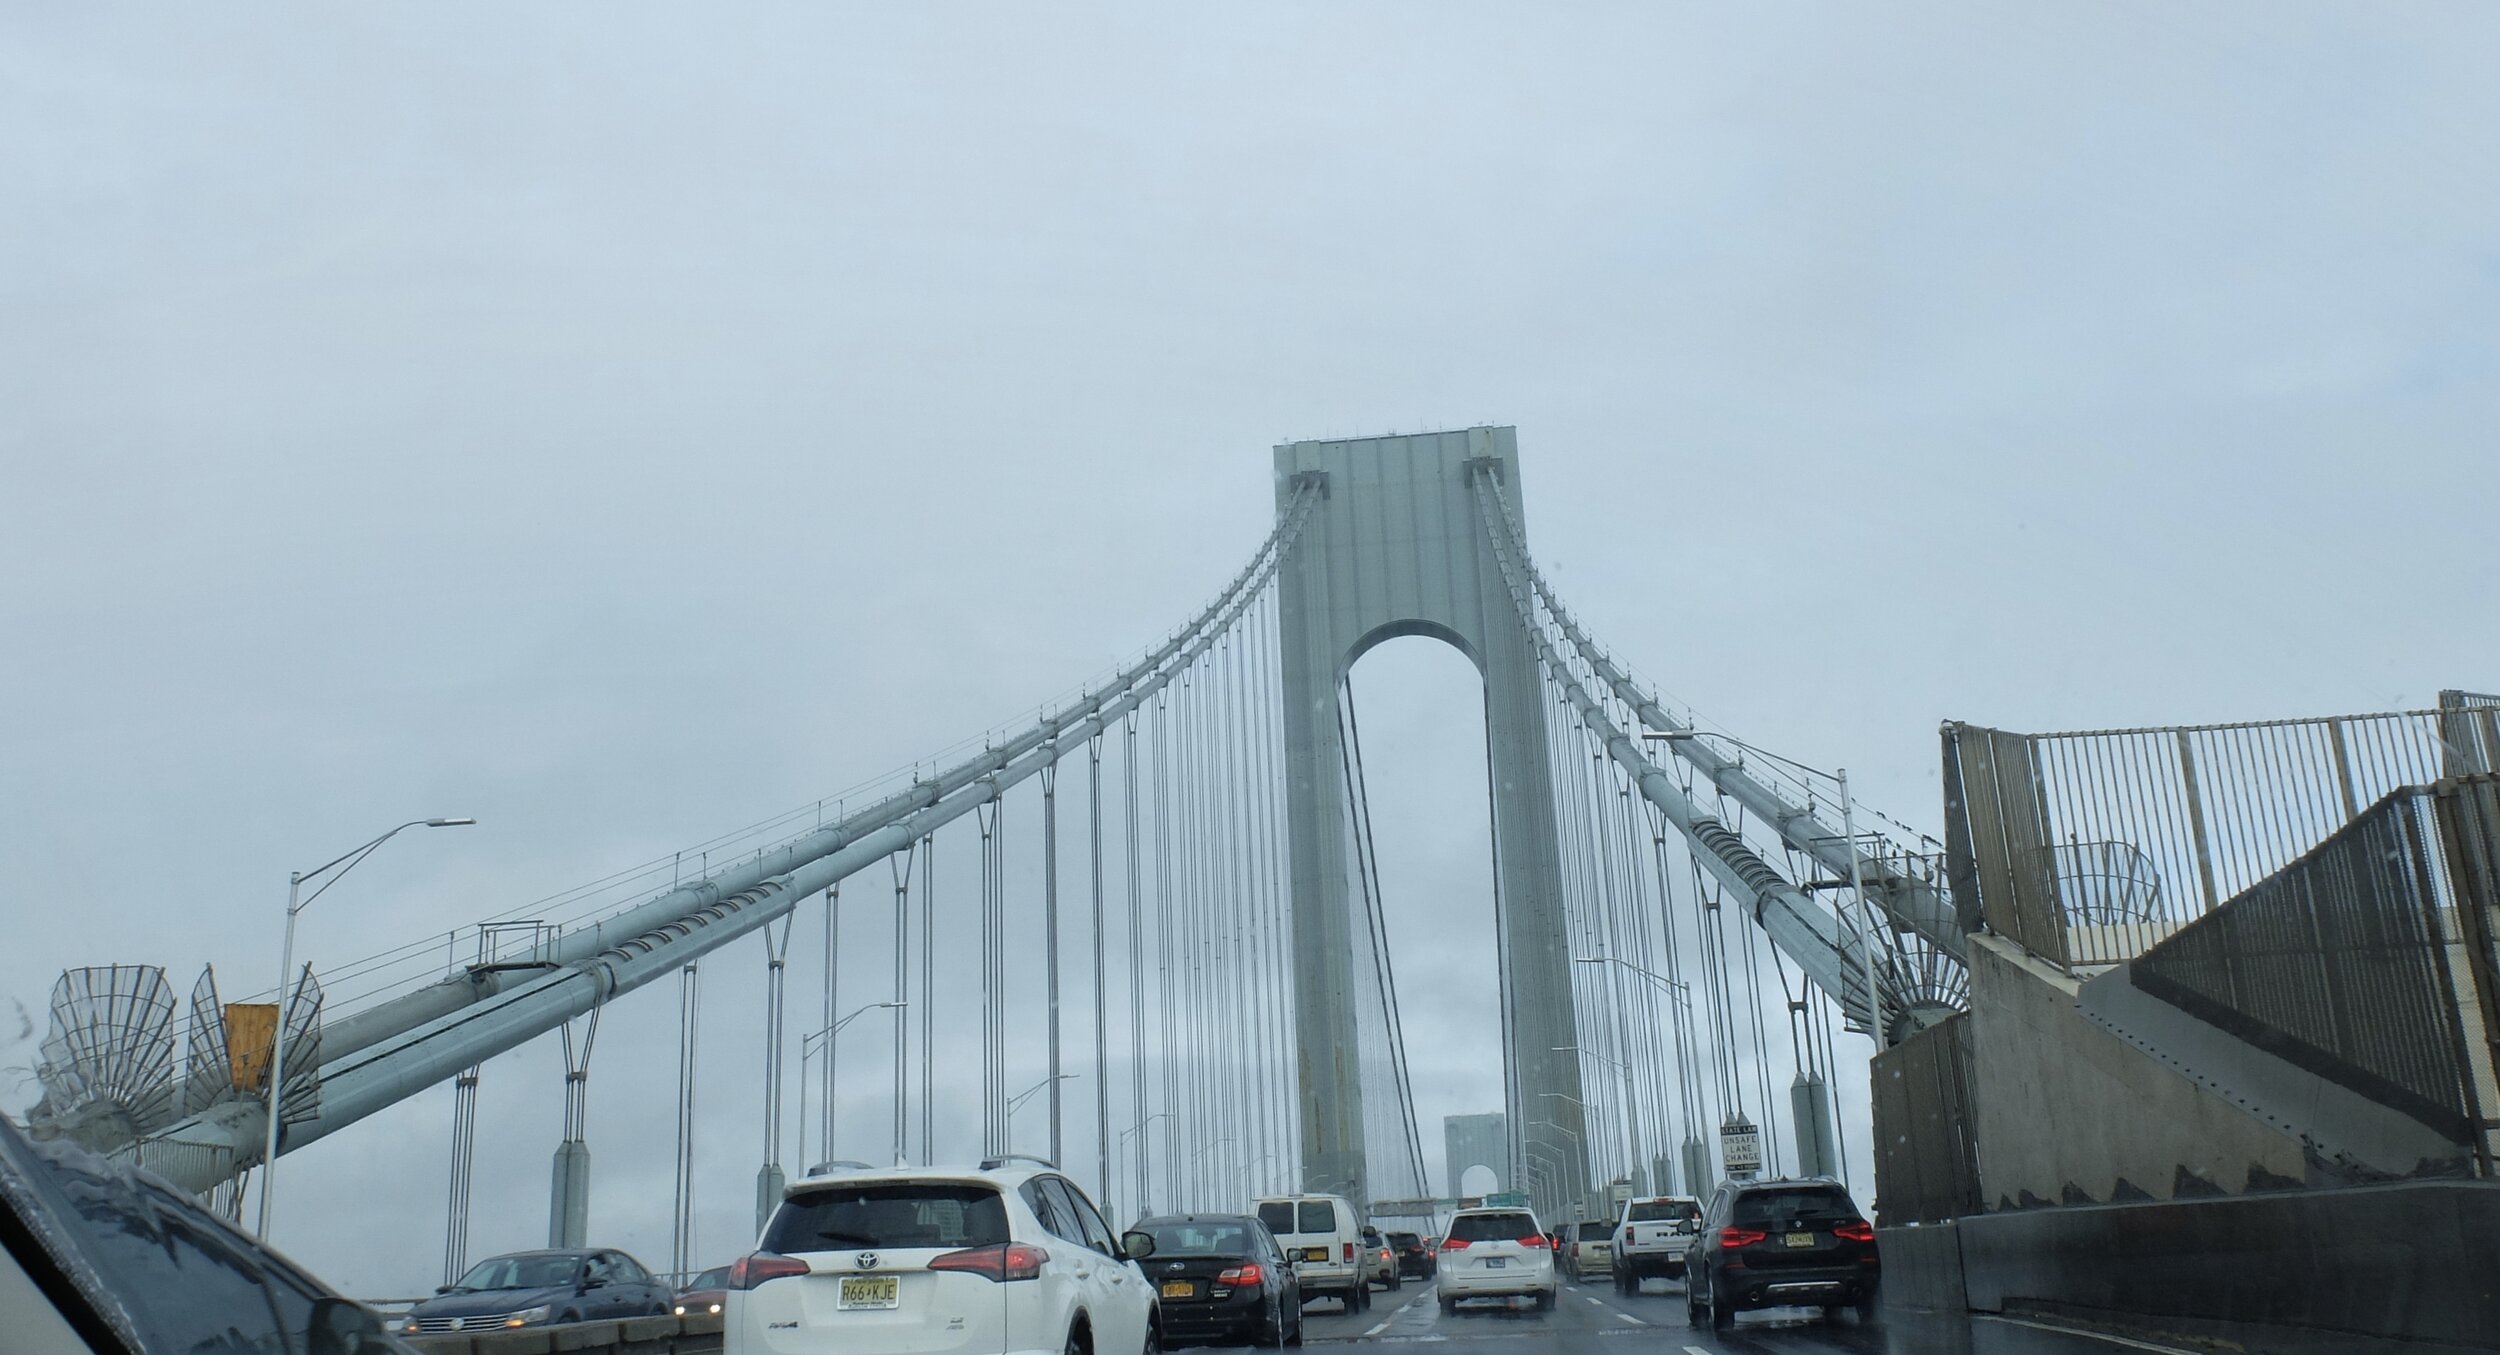 Verrazzano-Narrows Bridge, formerly spelled Verrazano, spanning New York Harbor from Brooklyn to Staten Island, built by Othmar H. Ammann from 1959 to 1964.